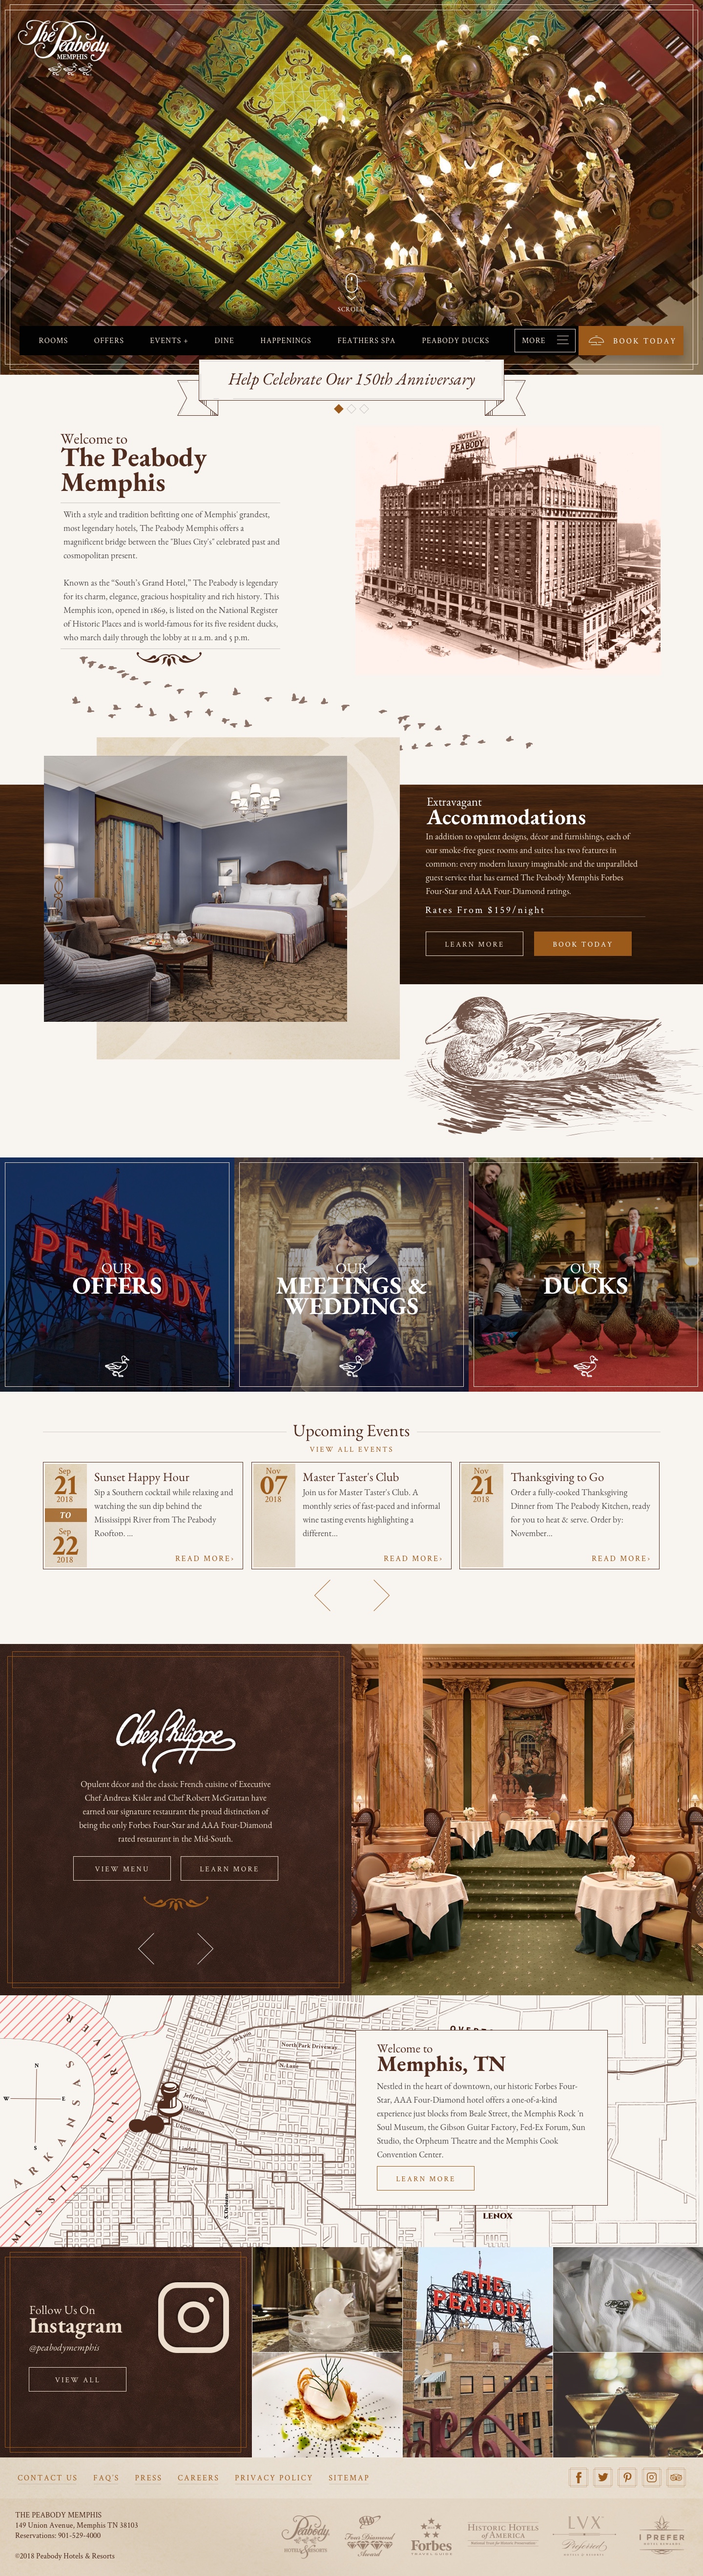 The Peabody Memphis - Home Page Design